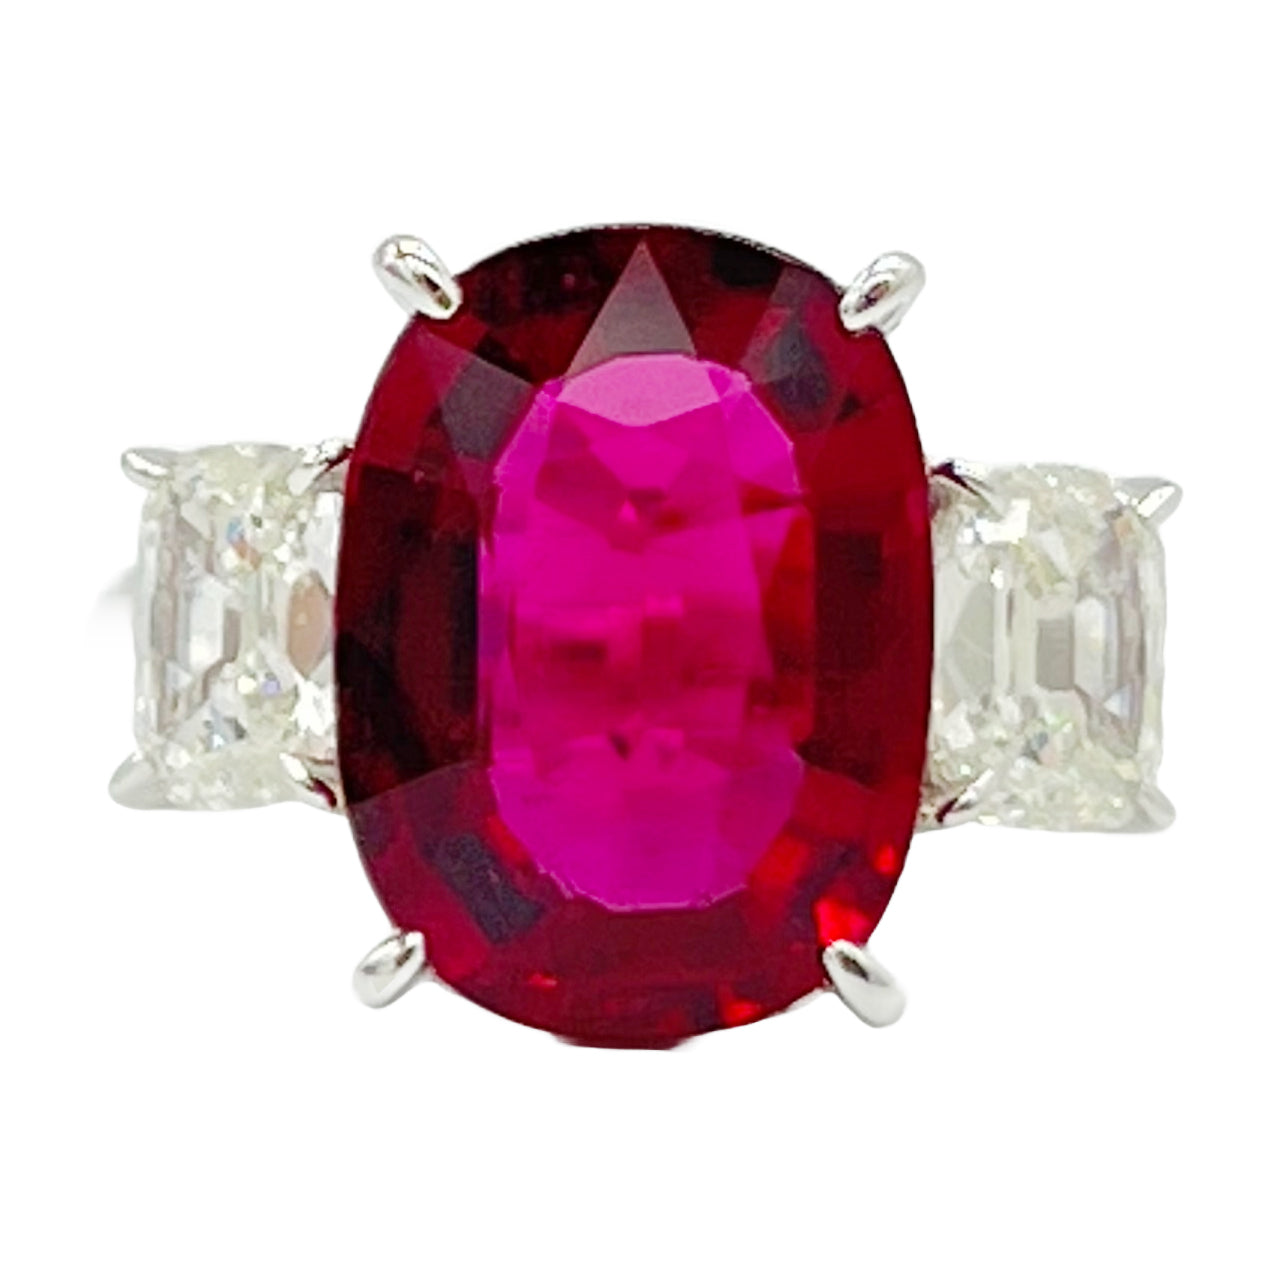 Ring 18KW/4.2G 1RUBEL-4.96CT 2RD-0.98CT